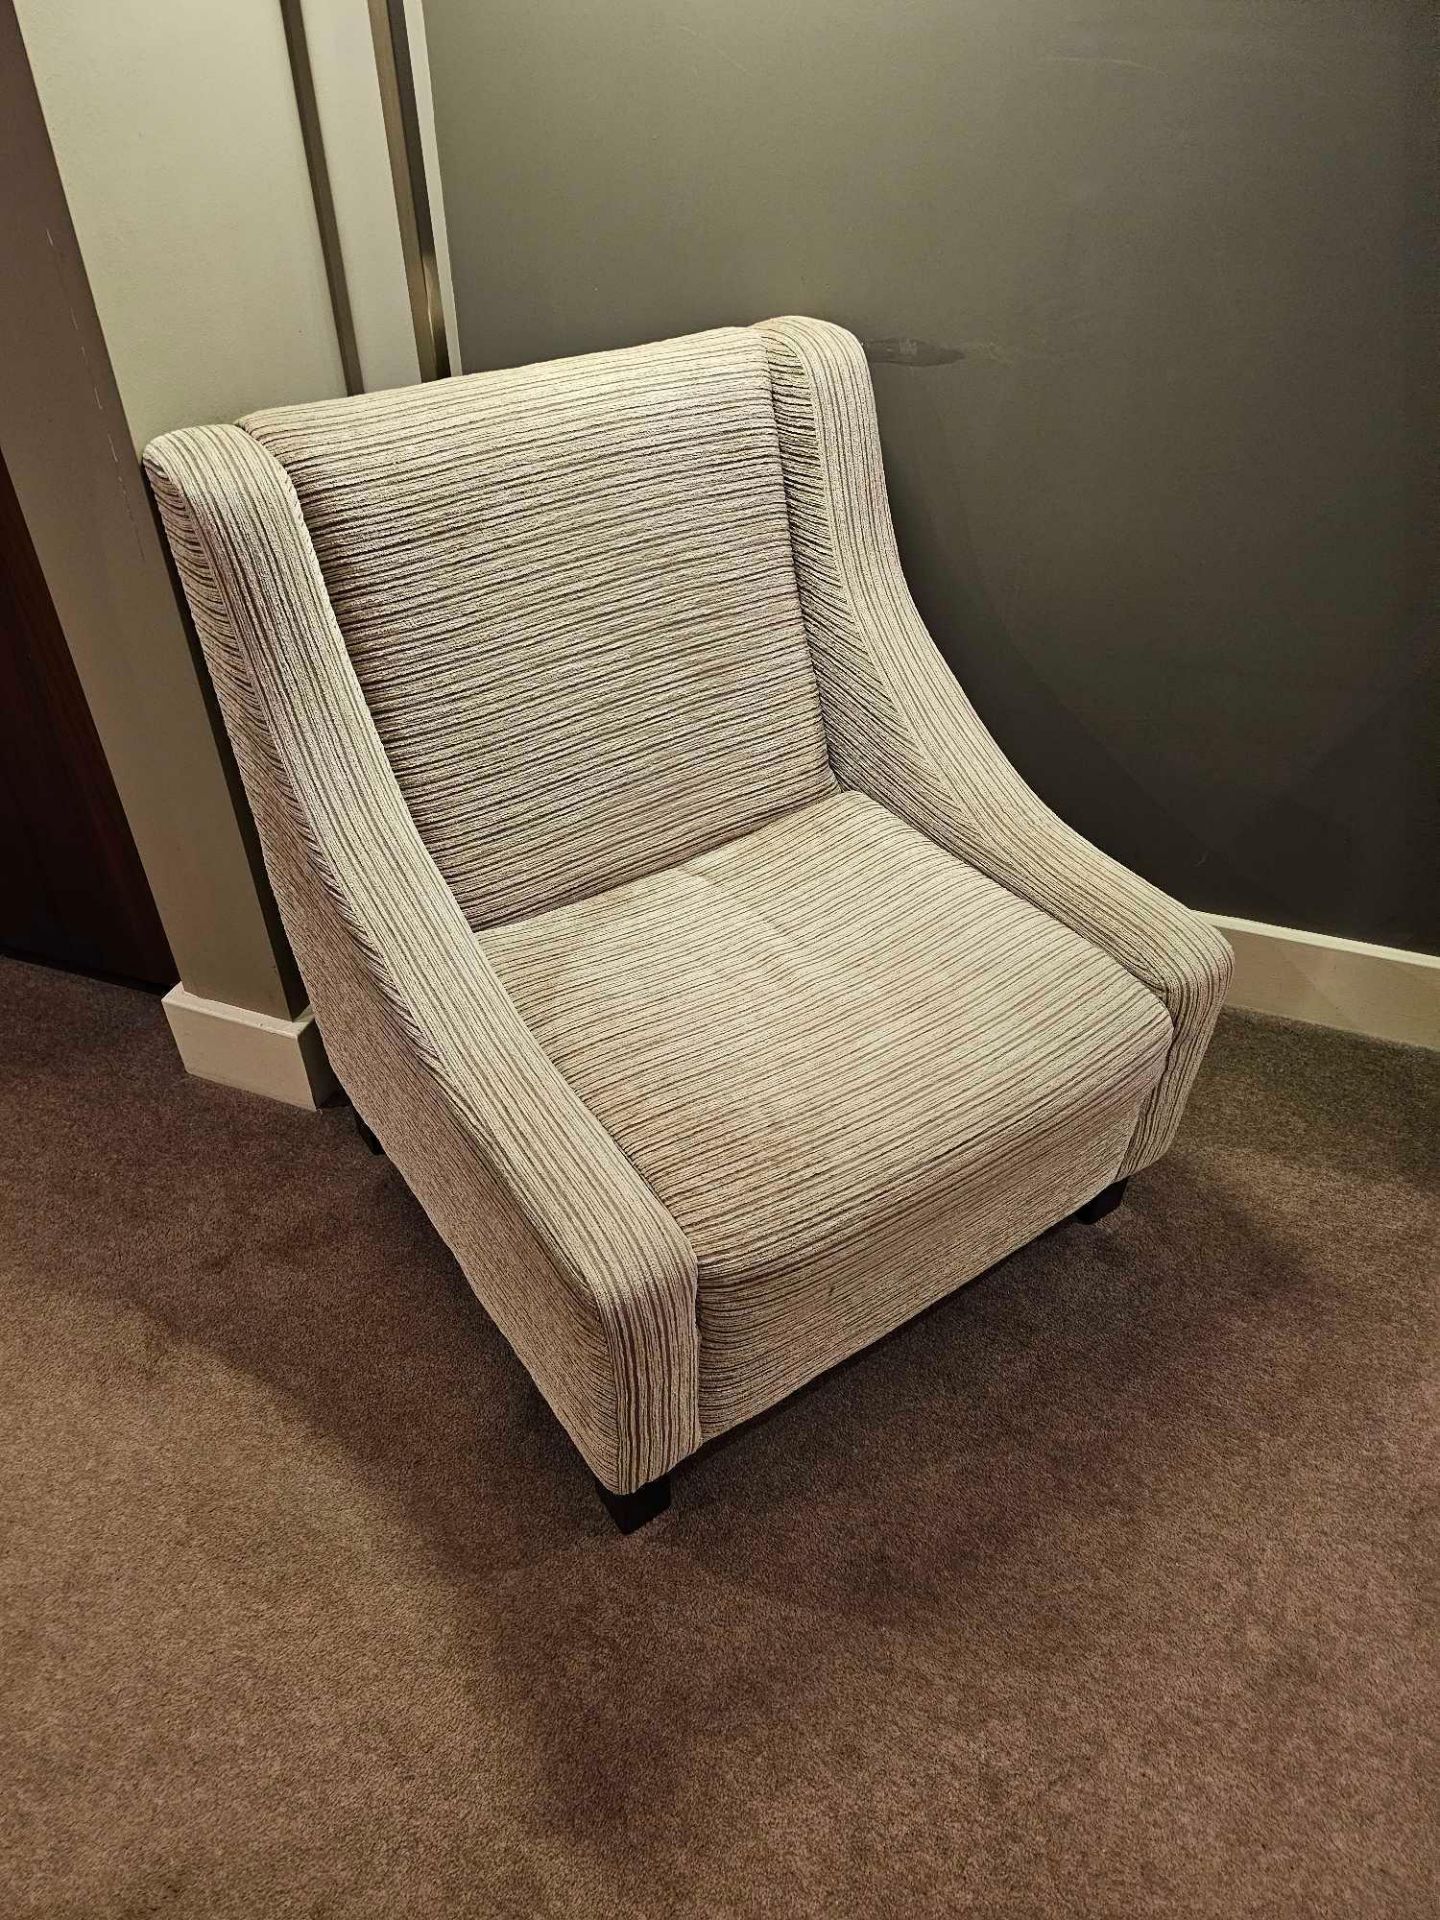 An upholstered relaxer chair 78 x 54 x 86cm ( Location : 212)